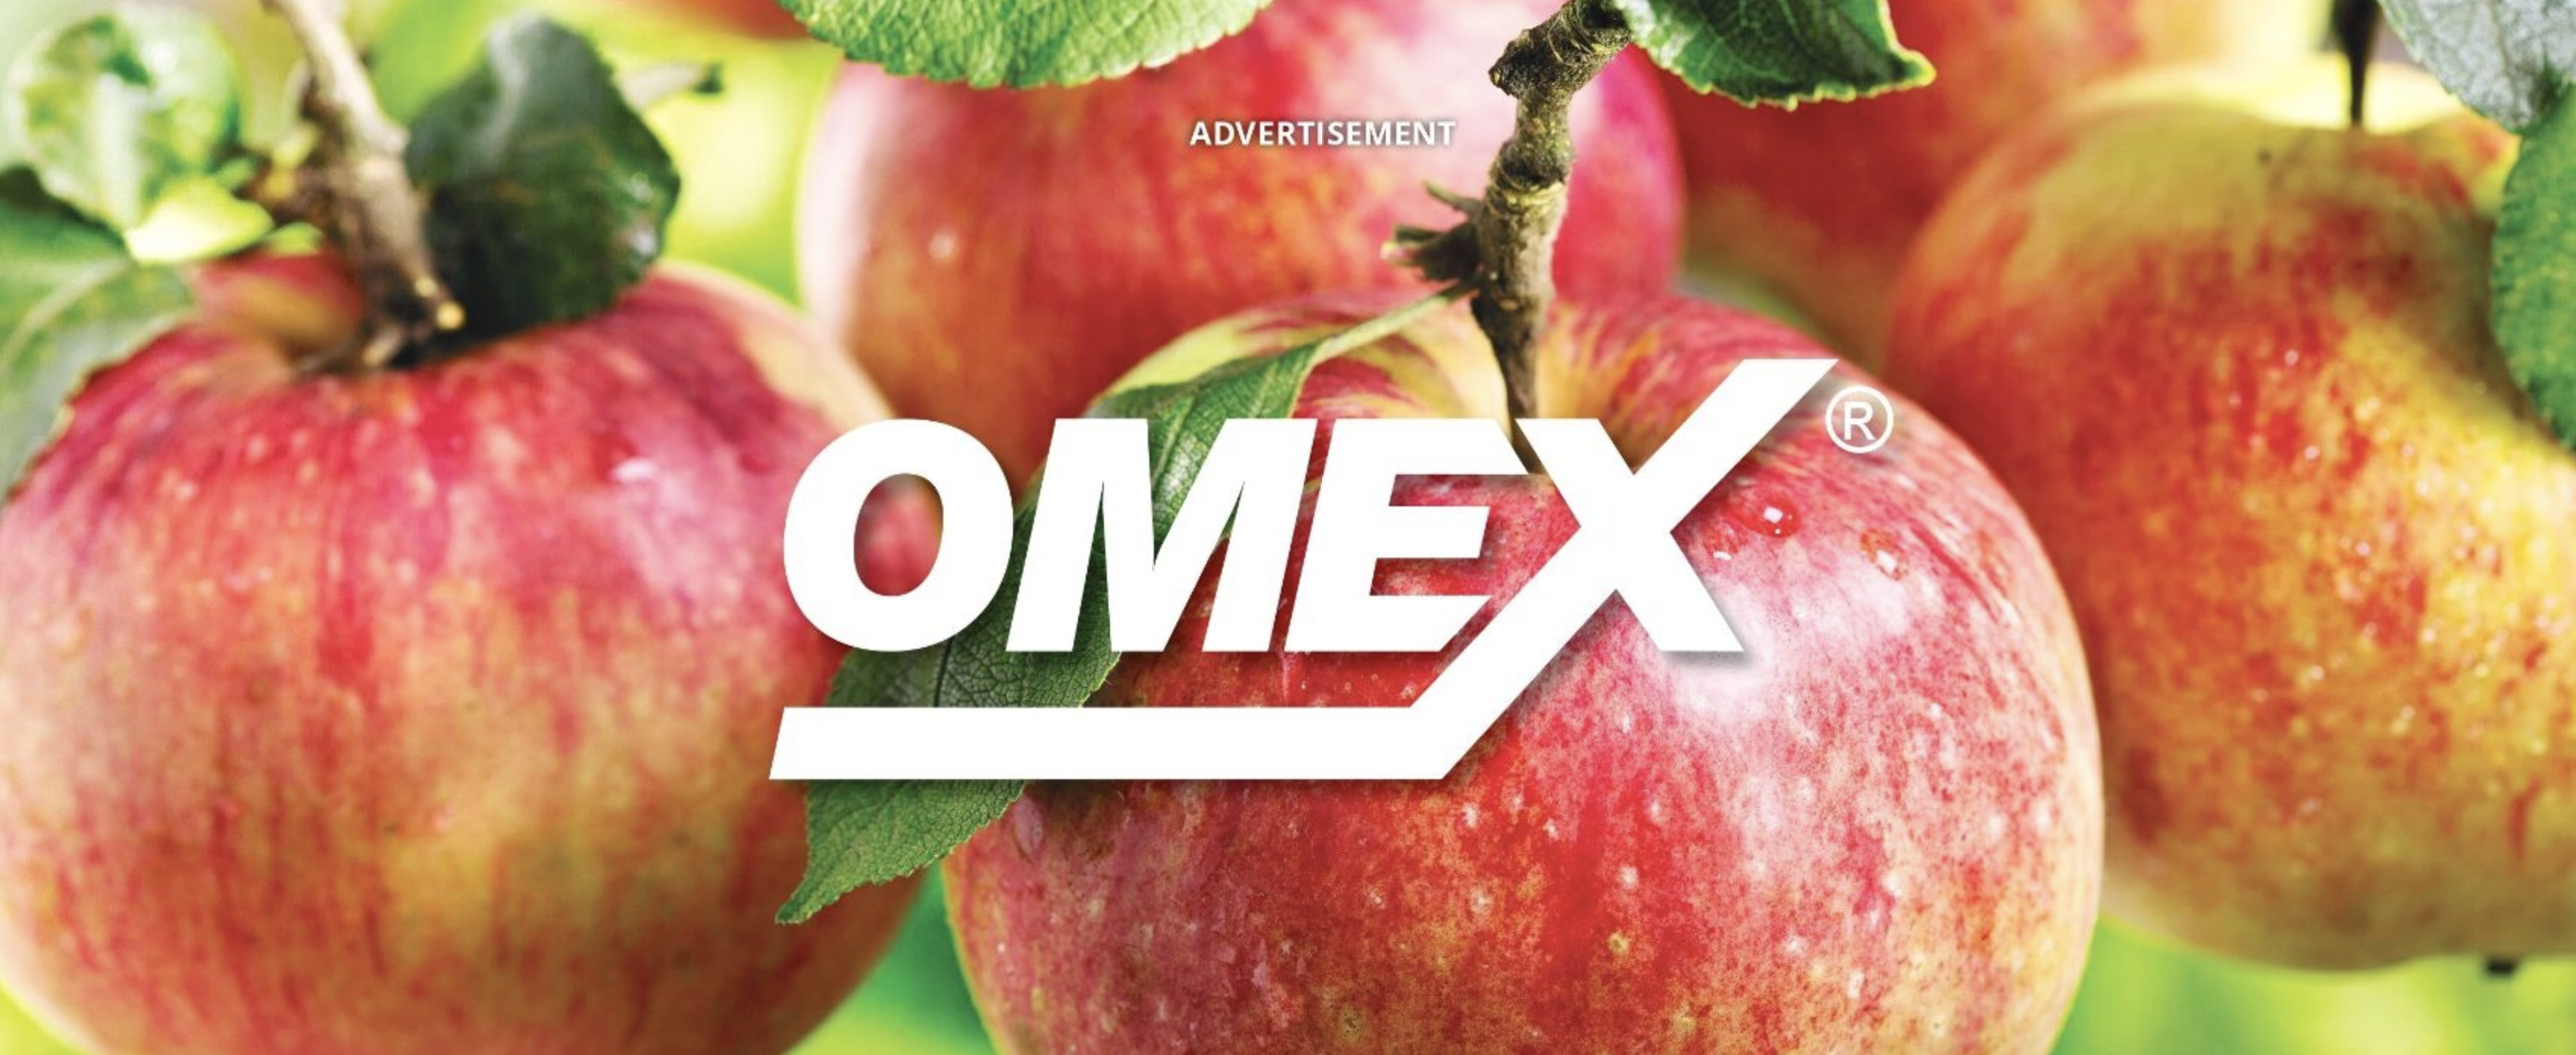 Image of apples on a tree with white OMEX logo on top as well as ADVERTISEMENT text